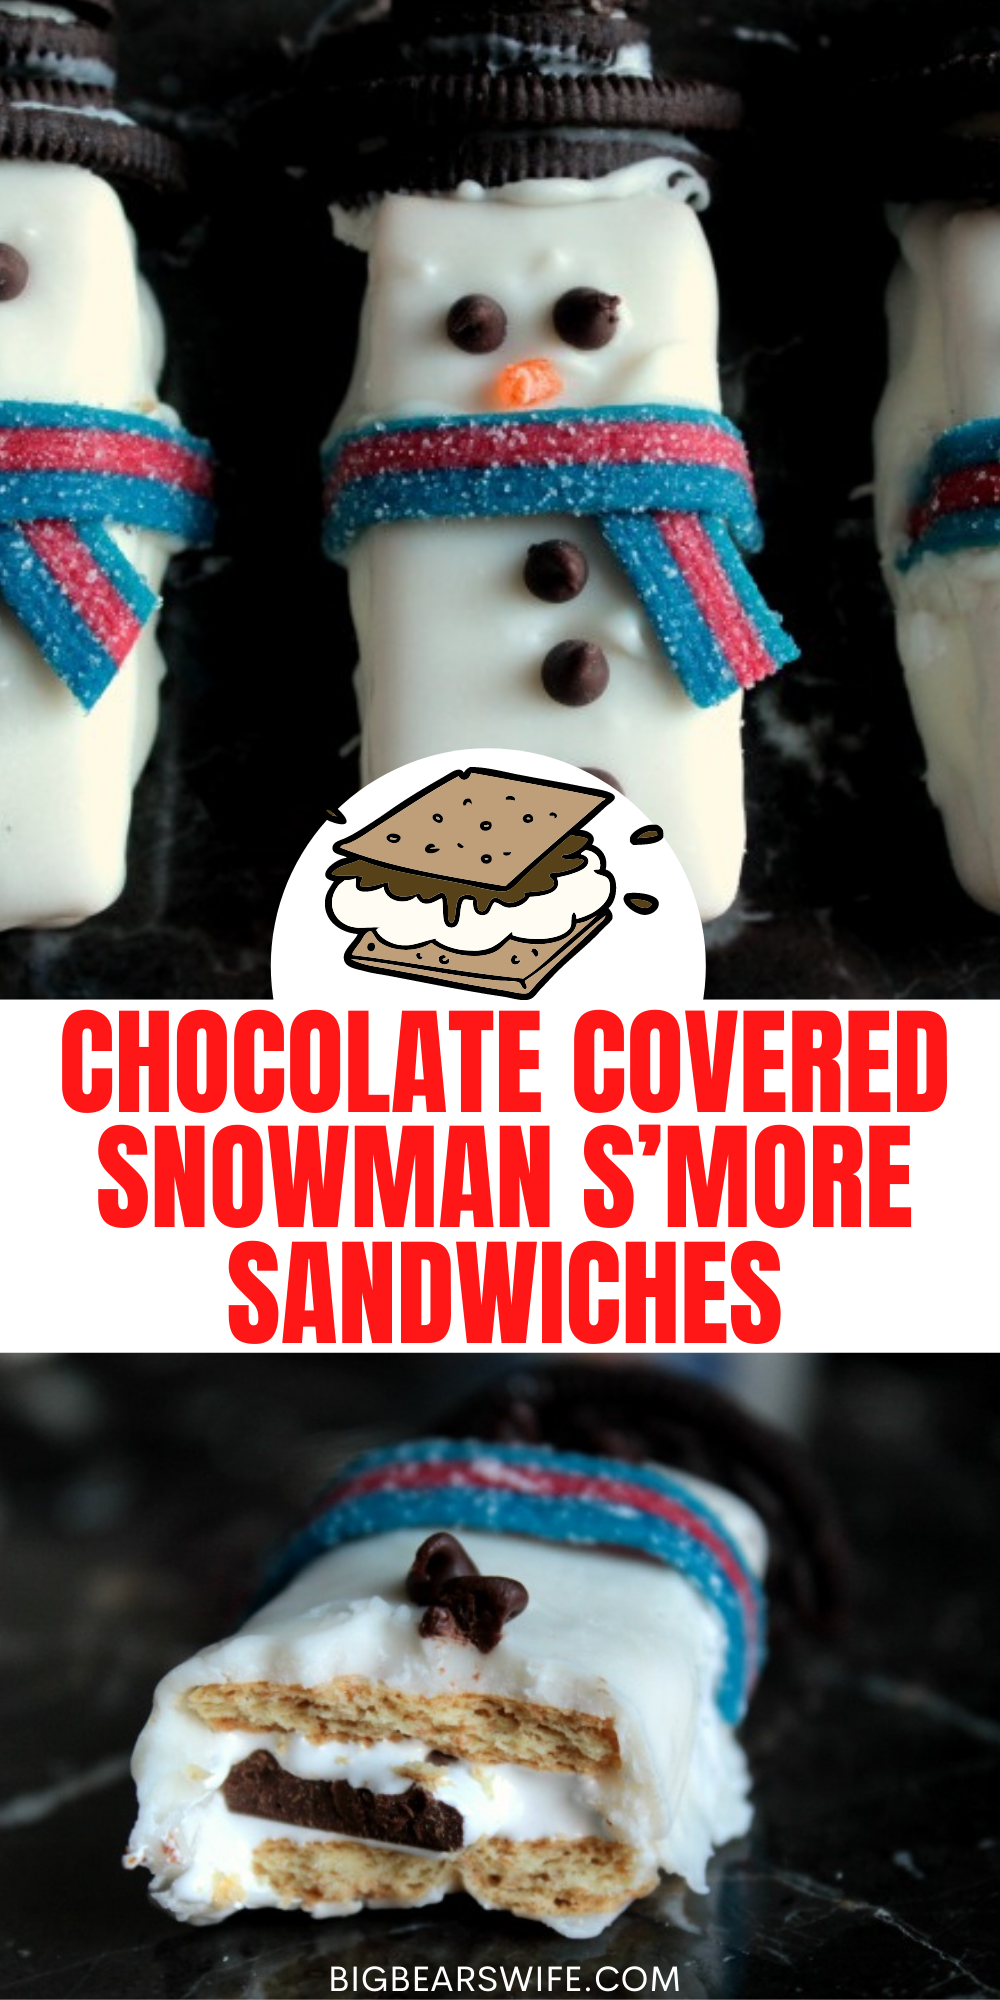  Graham Crackers, Marshmallow, Chocolate and Candies make up these Chocolate Covered Snowman S'more Sandwiches! Top them with Oreo hats and candy scarfs and serve them at your Holiday Party! via @bigbearswife